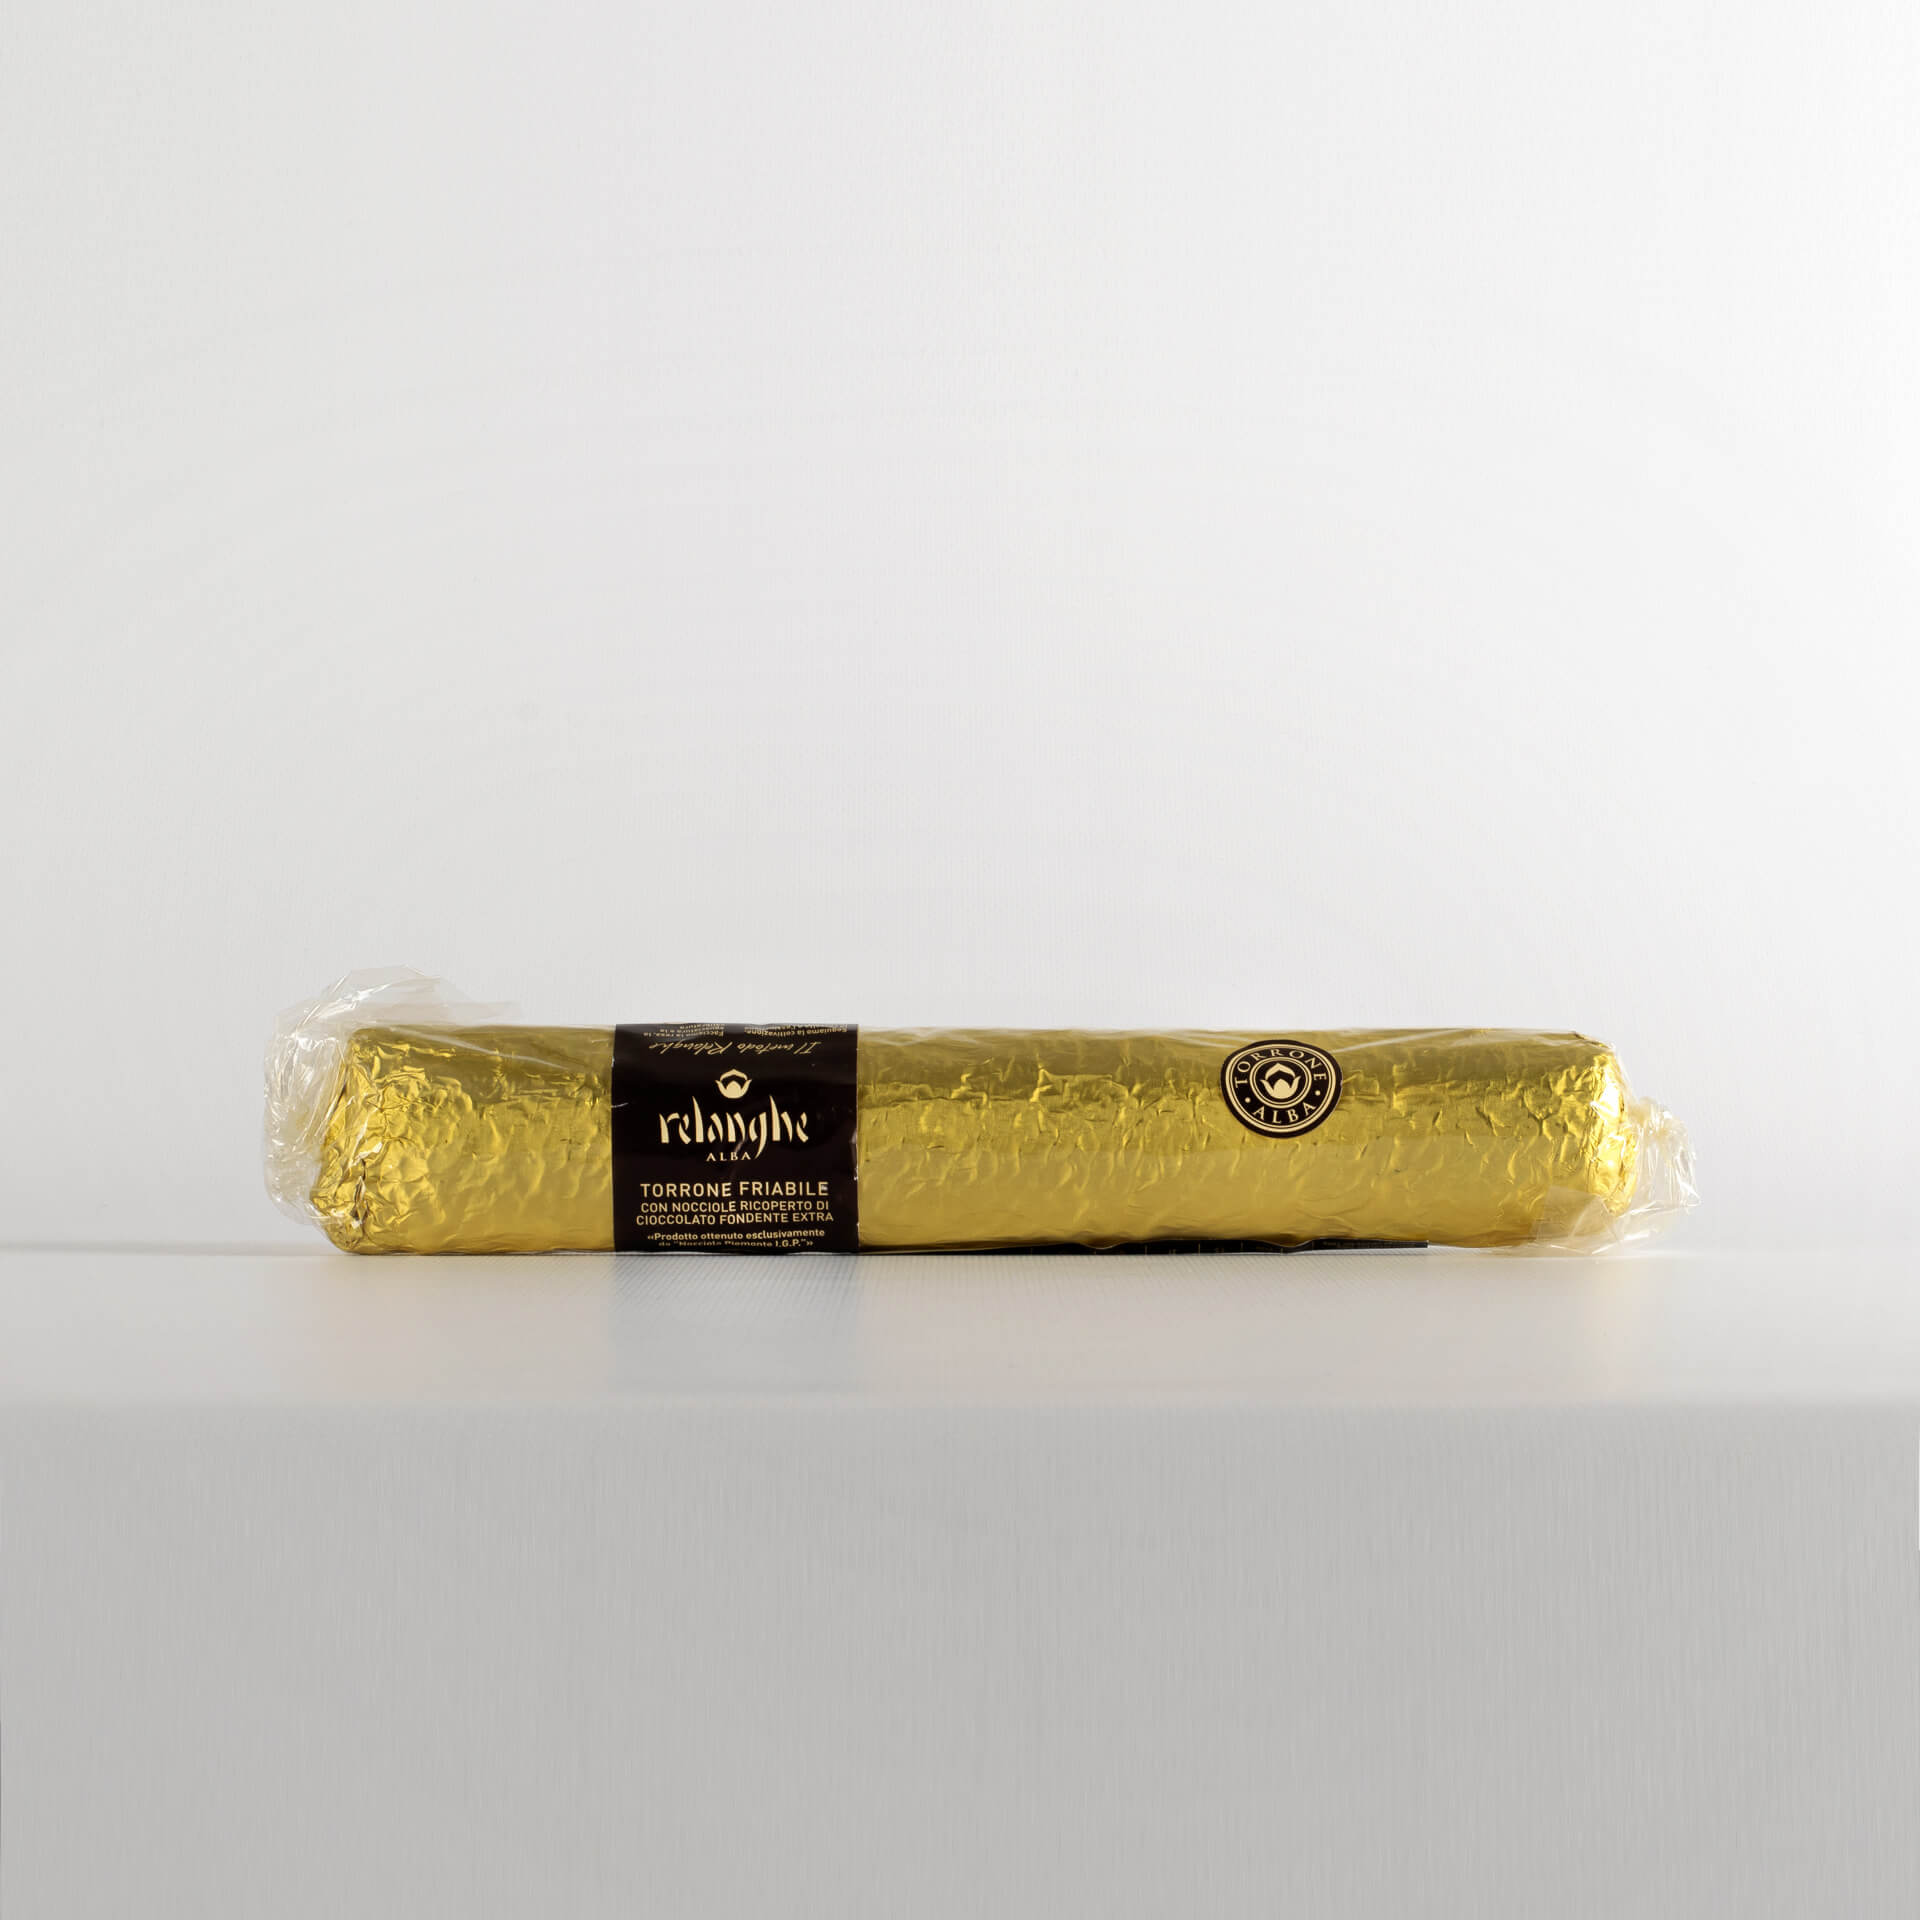 Tronchetto - Nougat with Piedmont Hazelnuts I.G.P Covered with Chocolate 250gr